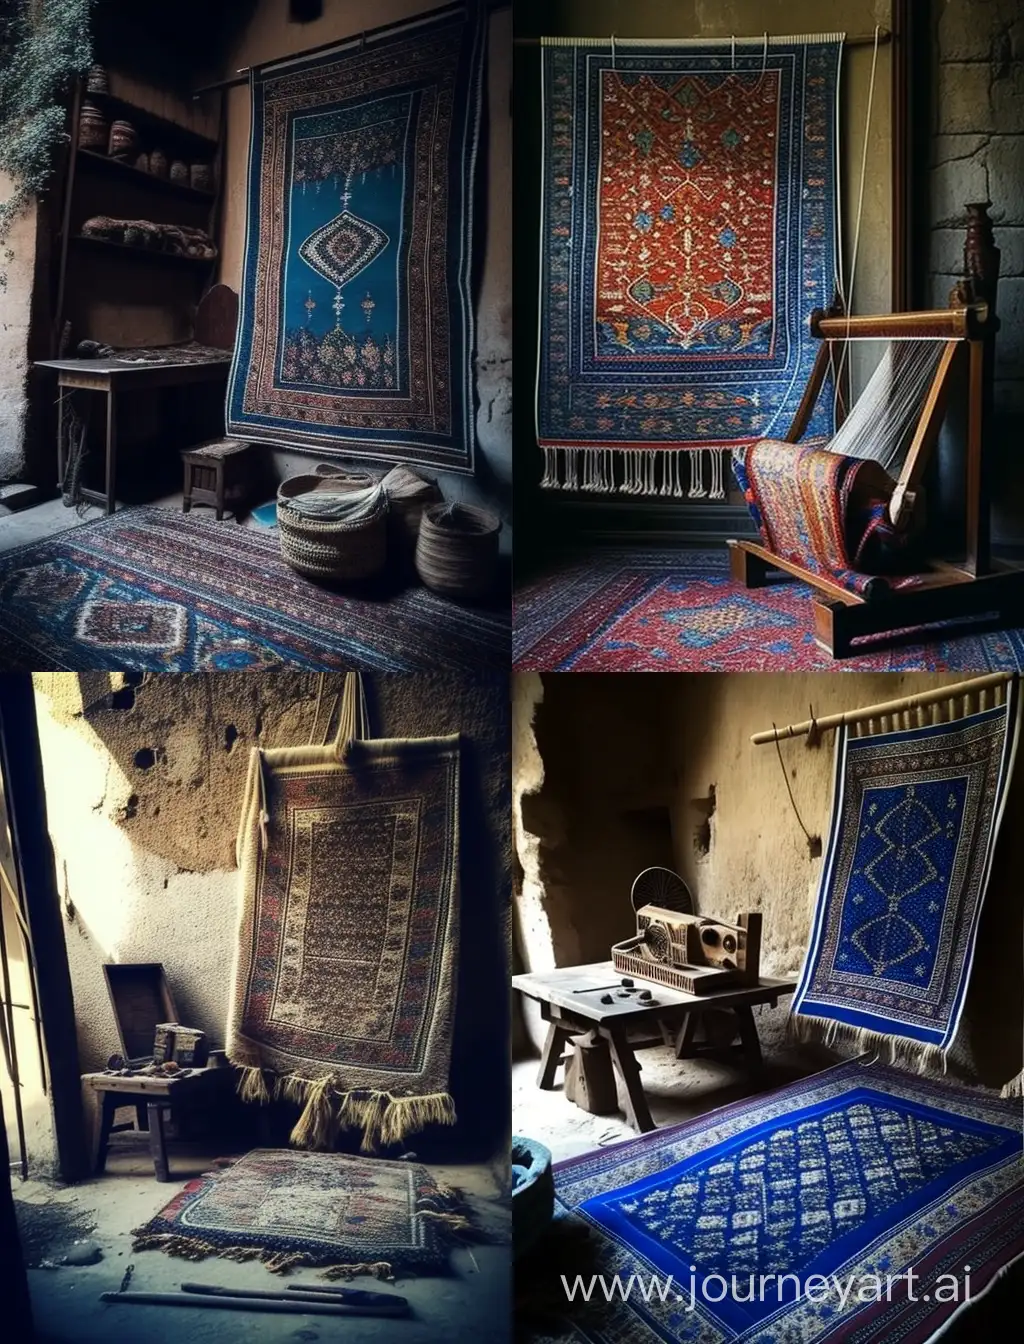 Authentic-Iranian-Carpet-Weaving-Against-Old-Wall